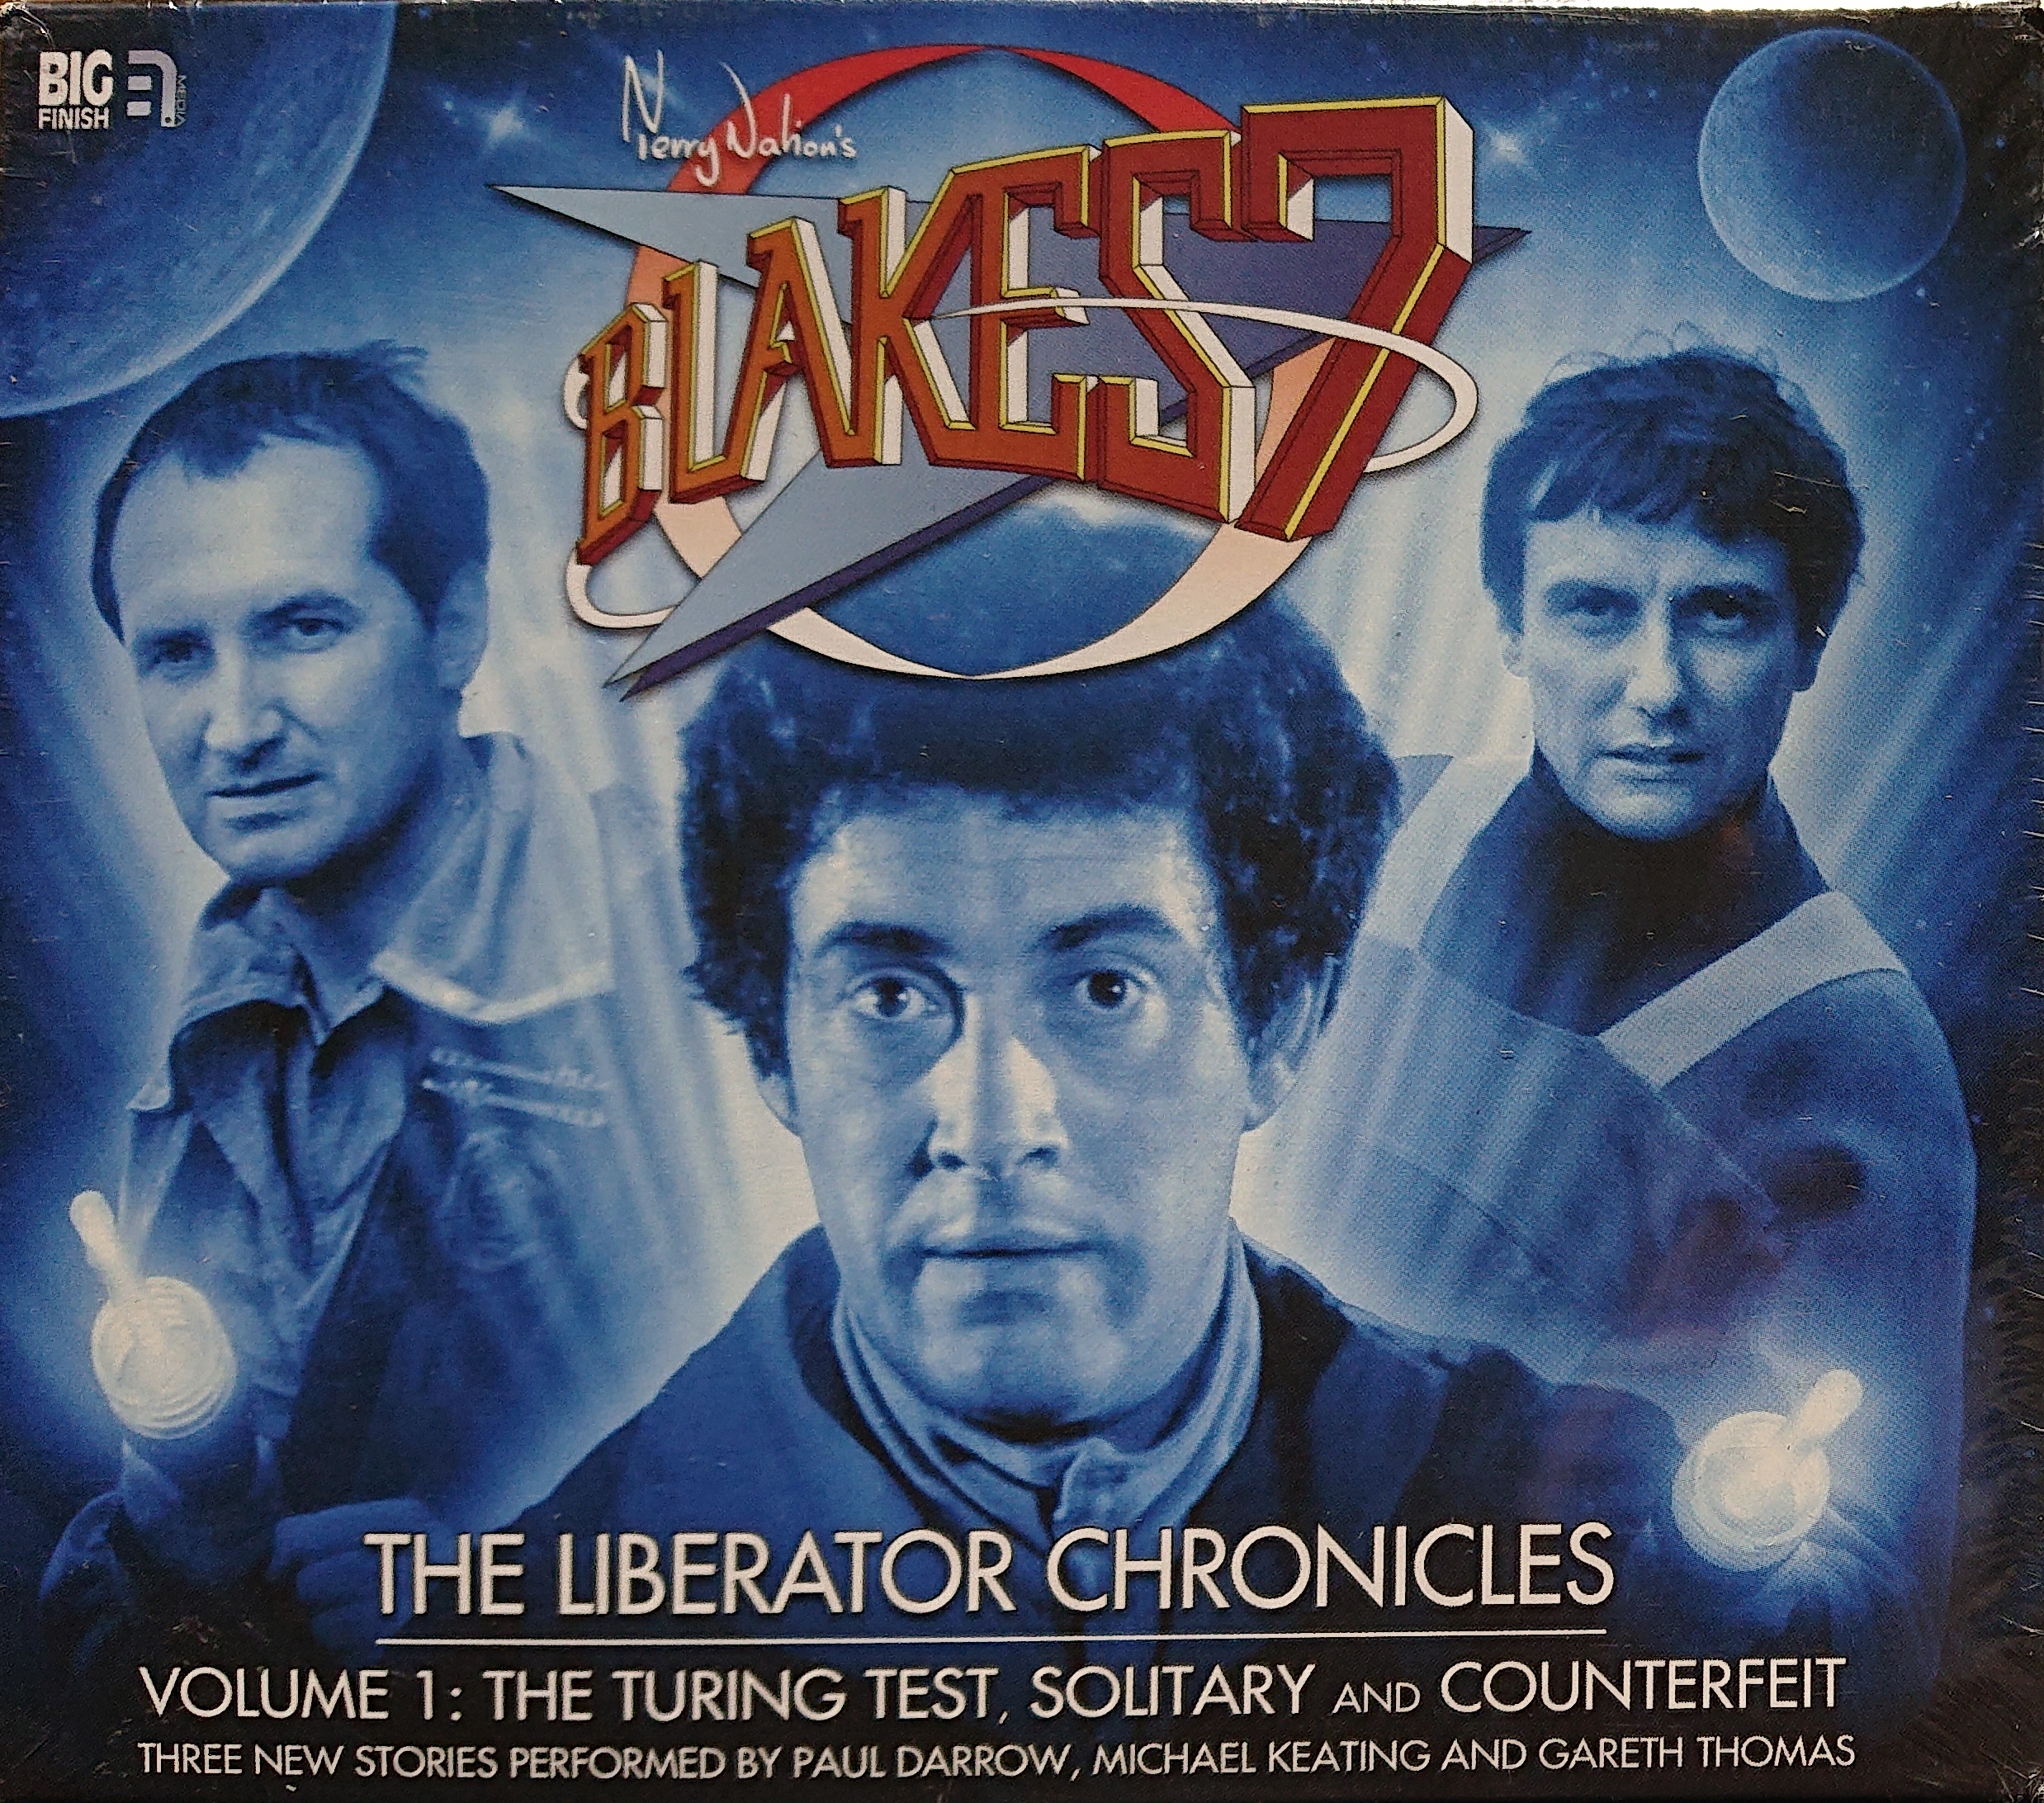 Picture of The Liberator chronicles - Volume 1 by artist Unknown from the BBC cds - Records and Tapes library